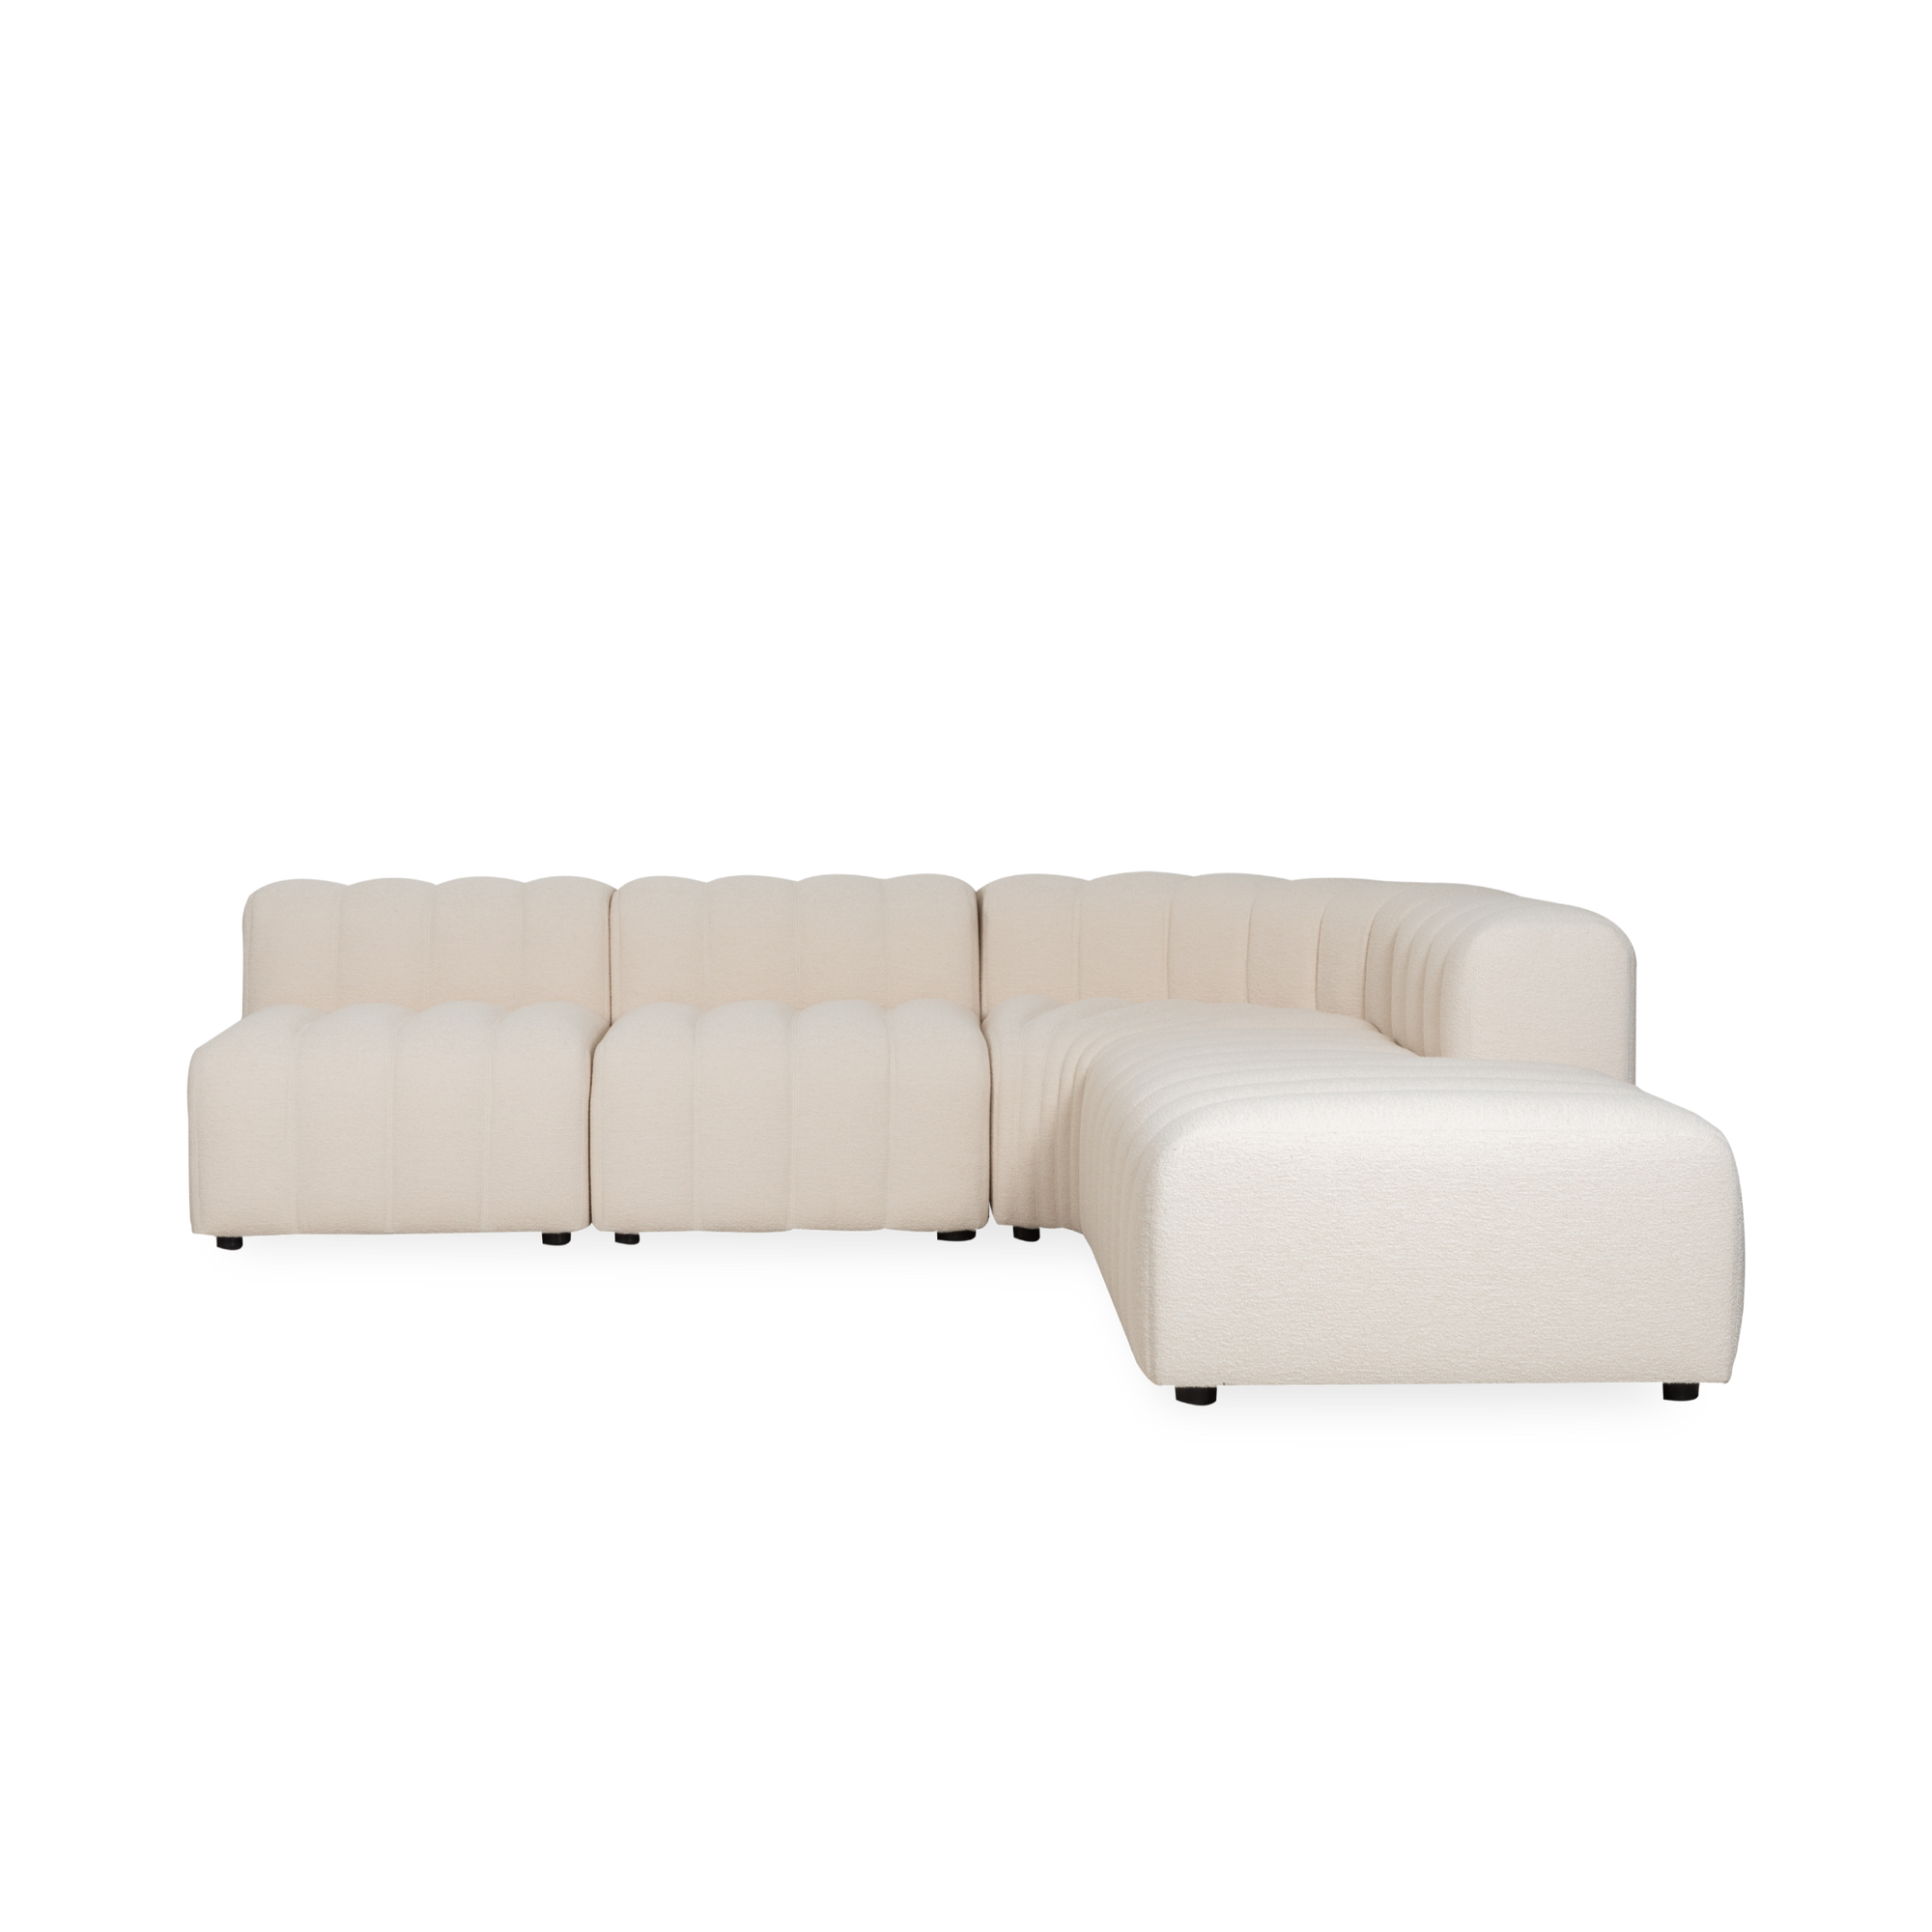 Defined by its elegant channeled tailoring, the Studio Modular Sectional takes inspiration from the design aesthetics of the 1970s.